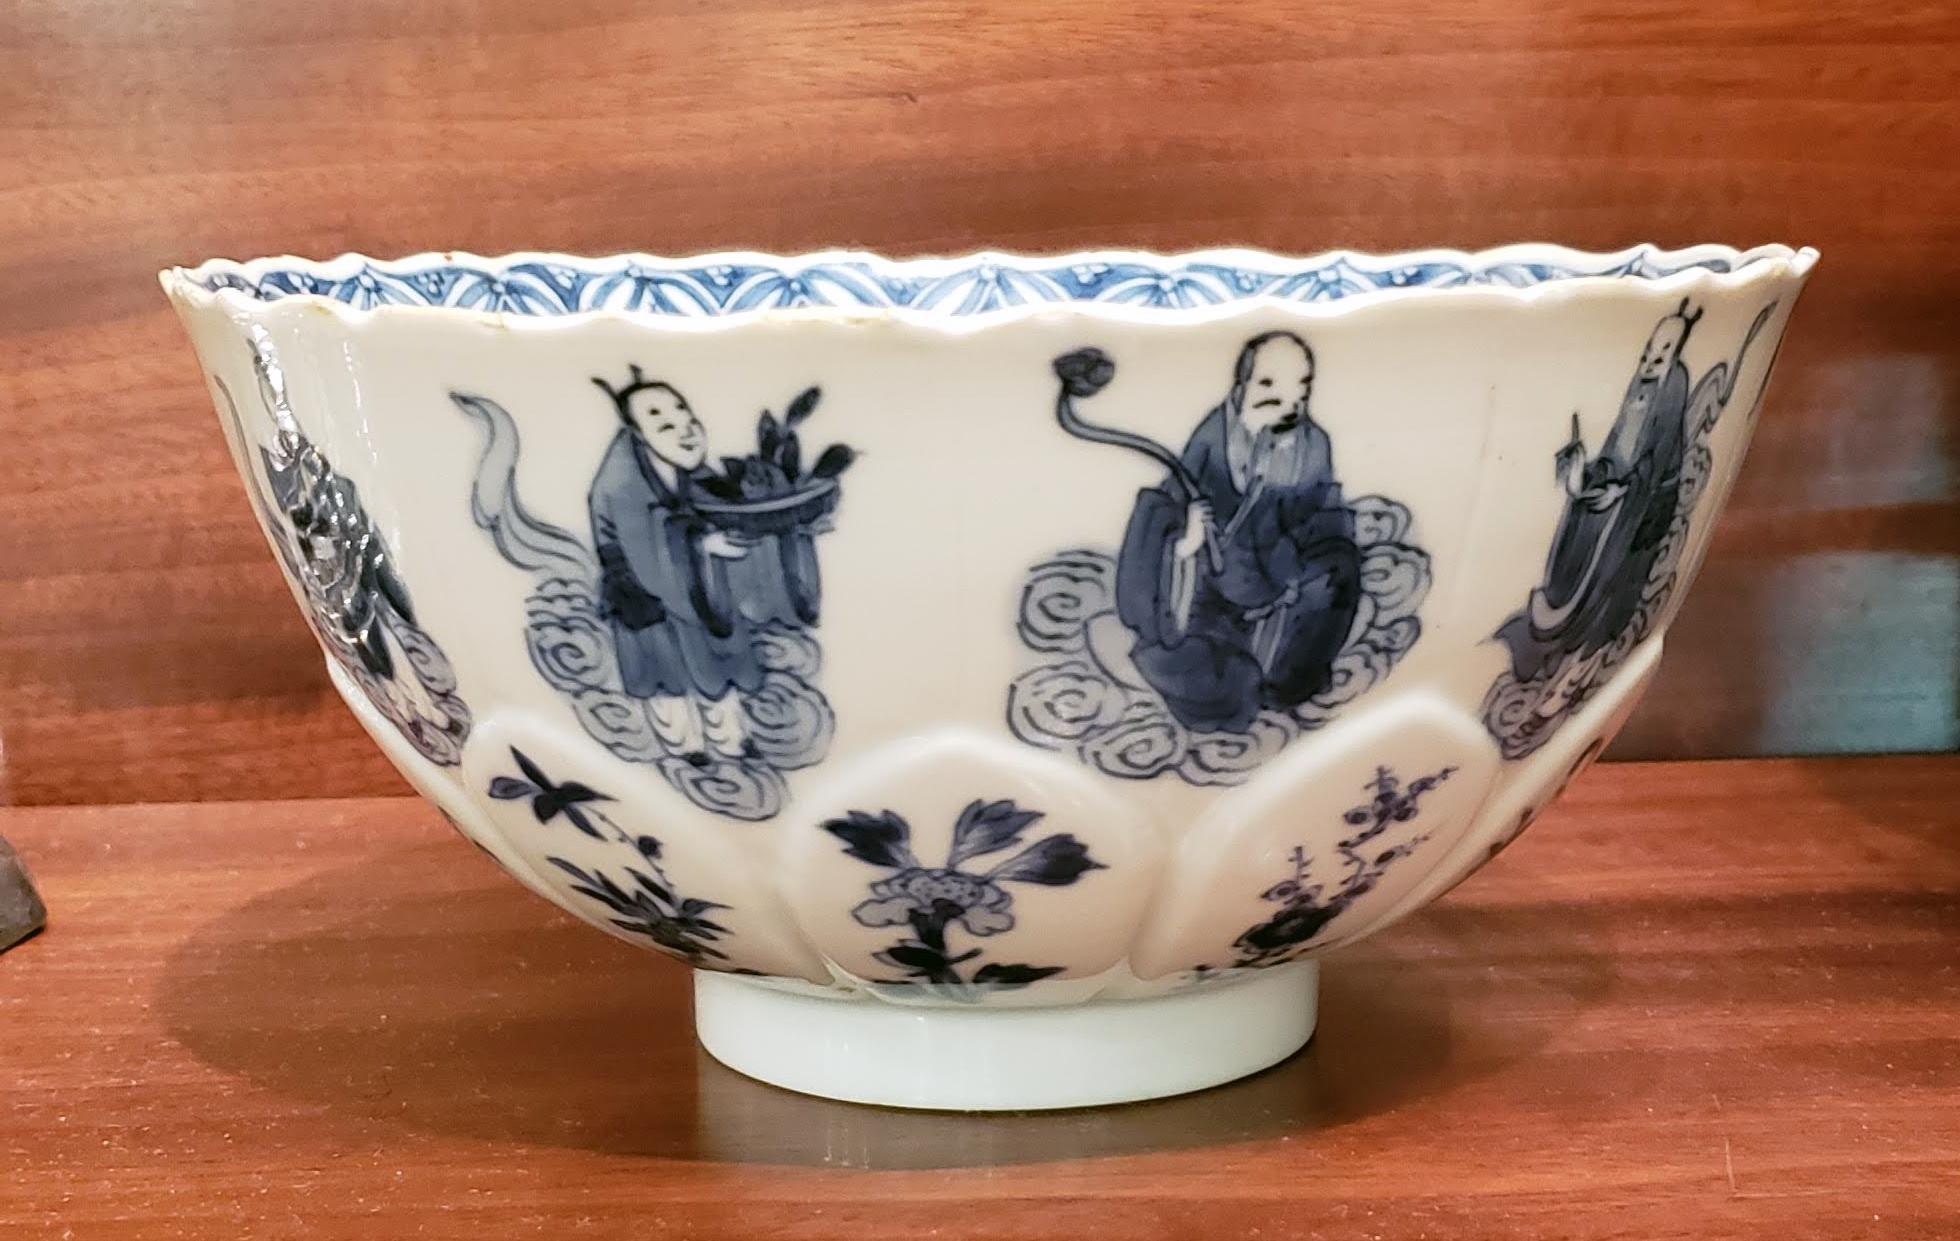 Kangxi period Chinese blue and white bowl,
The Eight Immortals, the Three Star Gods and the goddess Xiwangmu,
circa 1700.

The circular bowl with a petal-shaped moulded lower section, each petal with a painted plant. The upper section with a